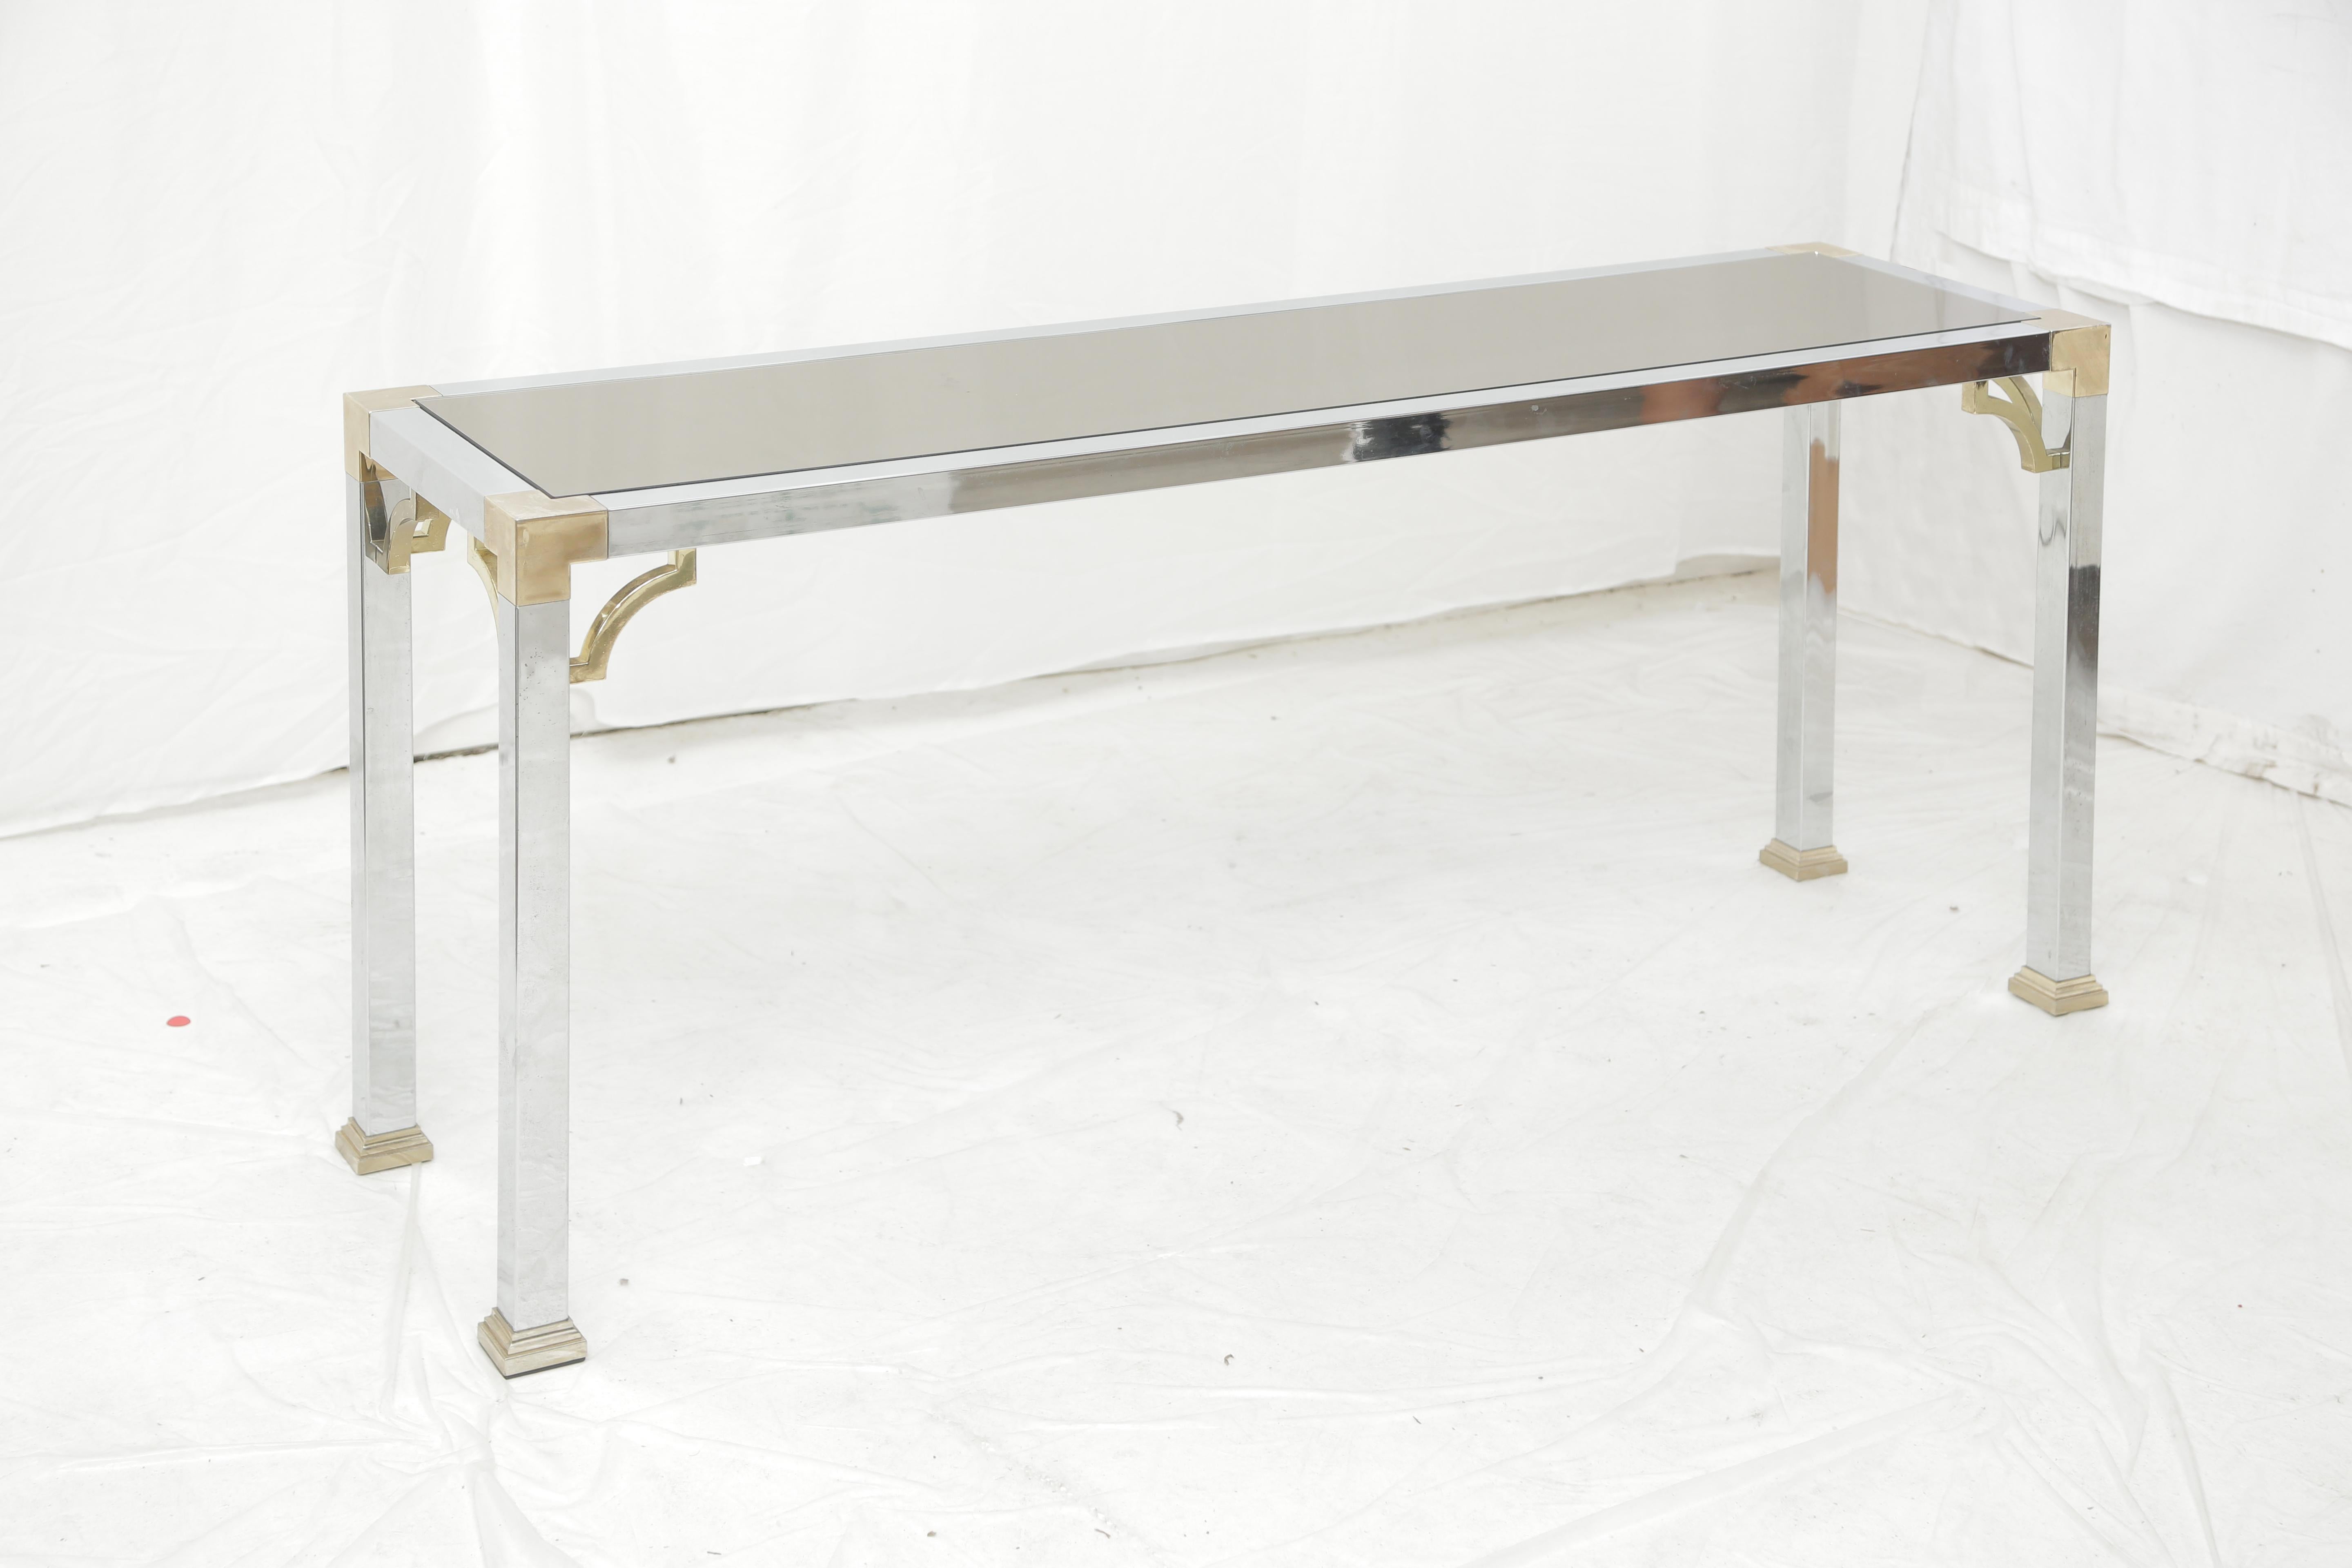 Pair of Mid-Century Modern brass and chrome console tables with a dark mirror top.
This pair of console tables will fit elegantly in an entrance or a corridor in any interior.